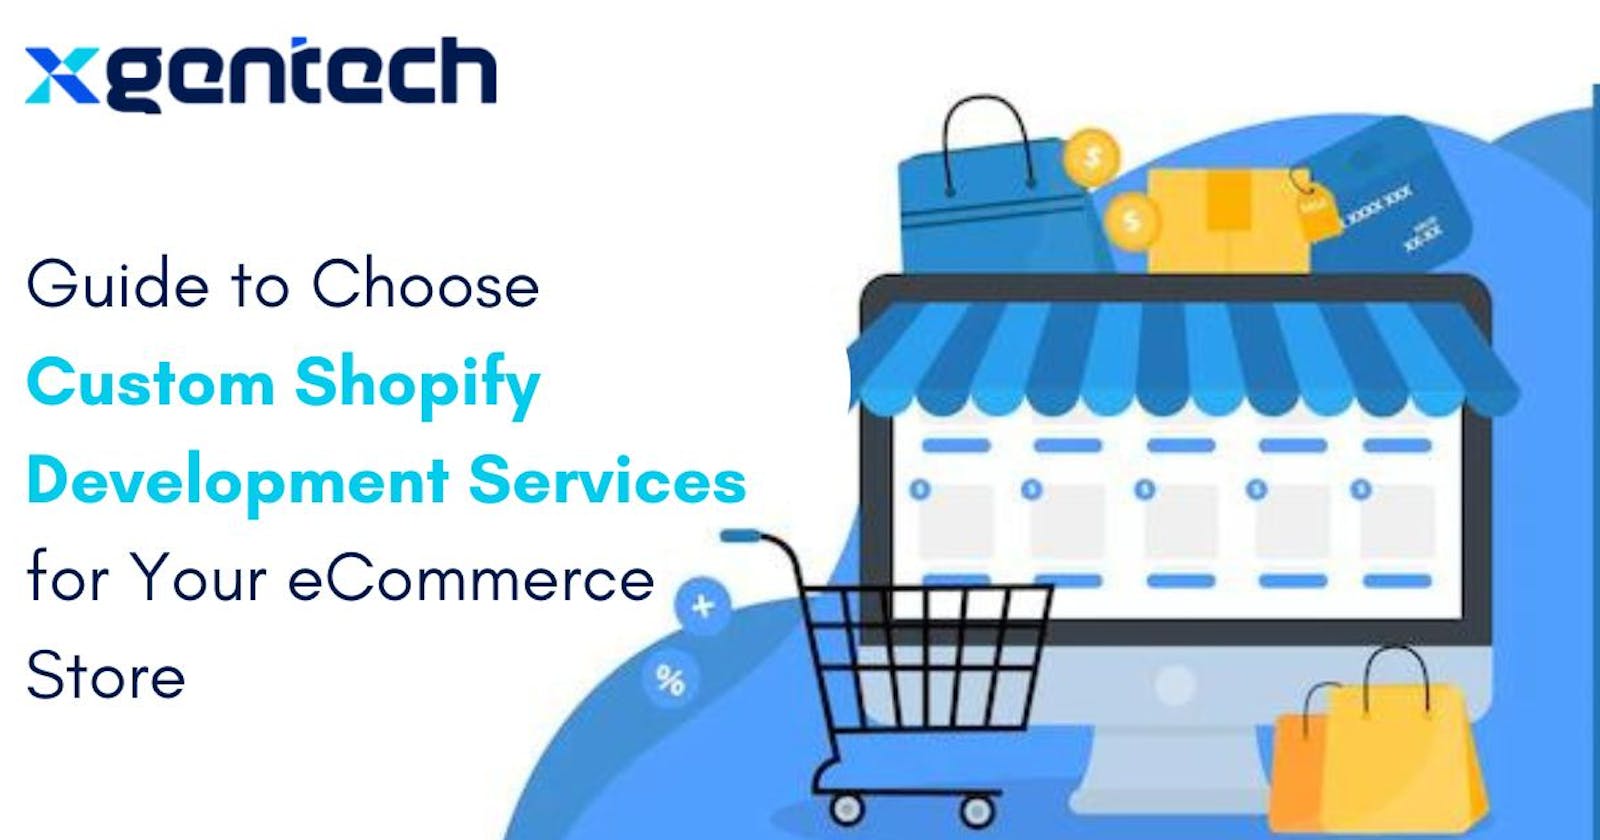 Guide to Choose Custom Shopify Development Services for Your eCommerce Store